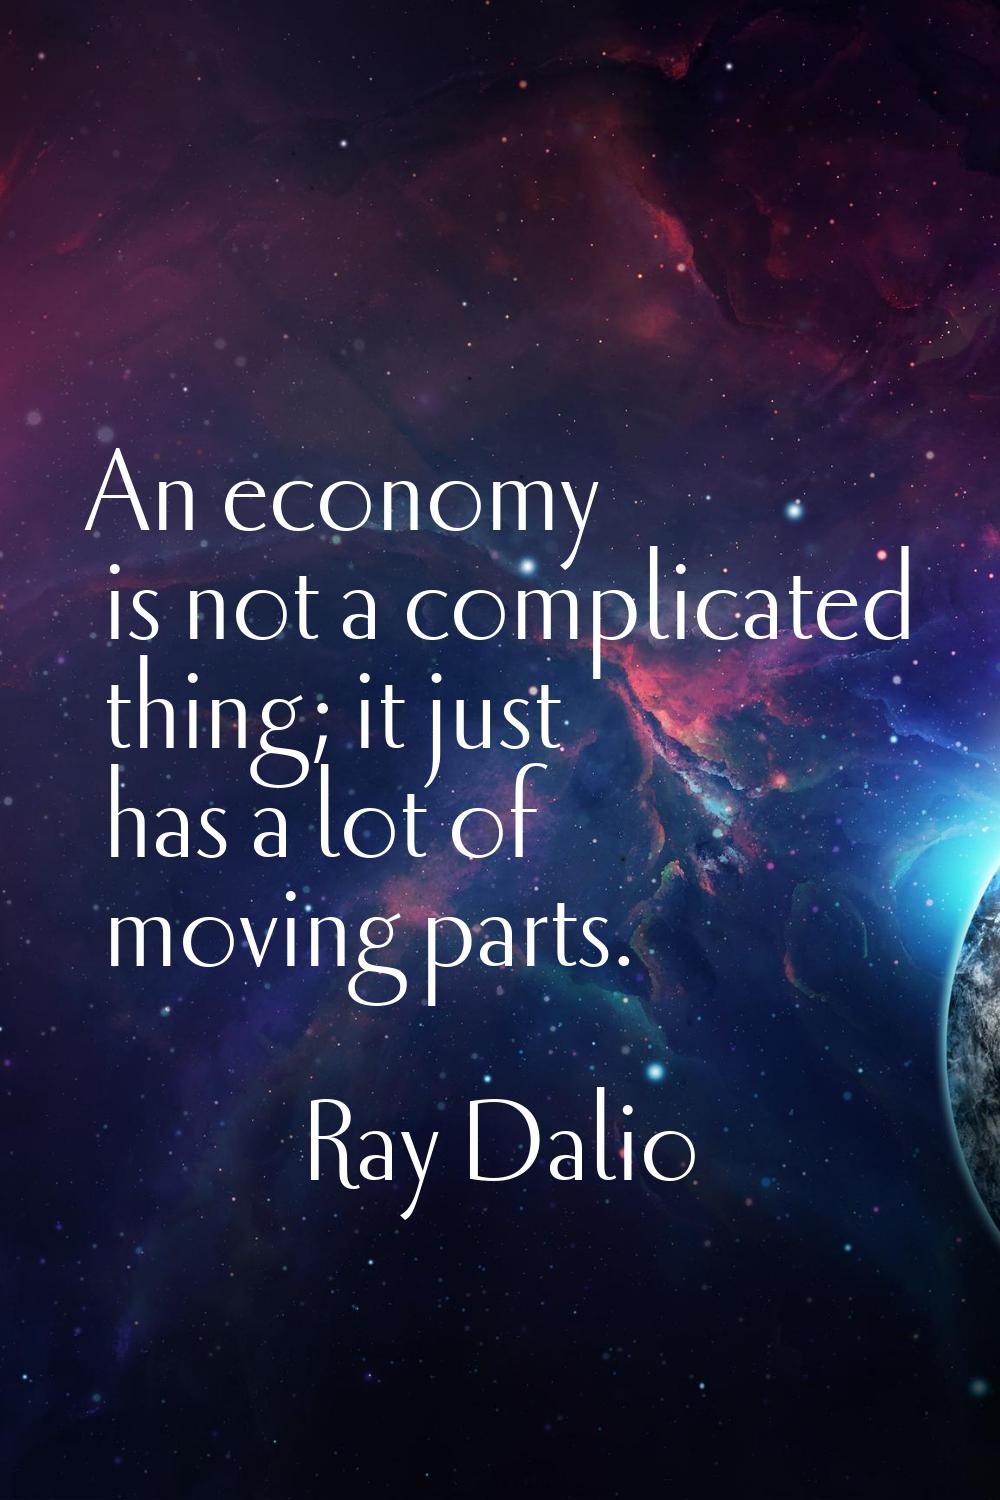 An economy is not a complicated thing; it just has a lot of moving parts.